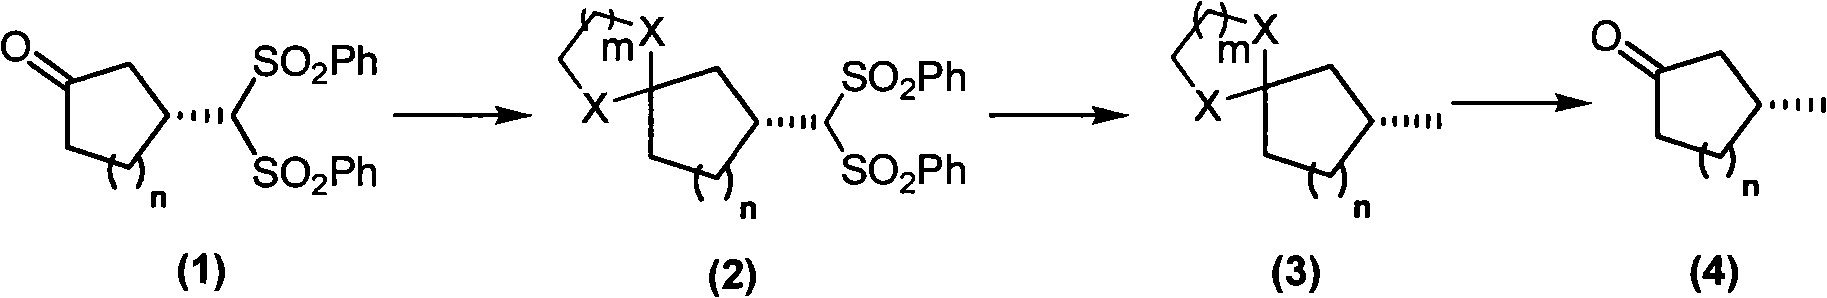 Asymmetric synthesis of chiral muskone and other 3-methyl cyclic ketone